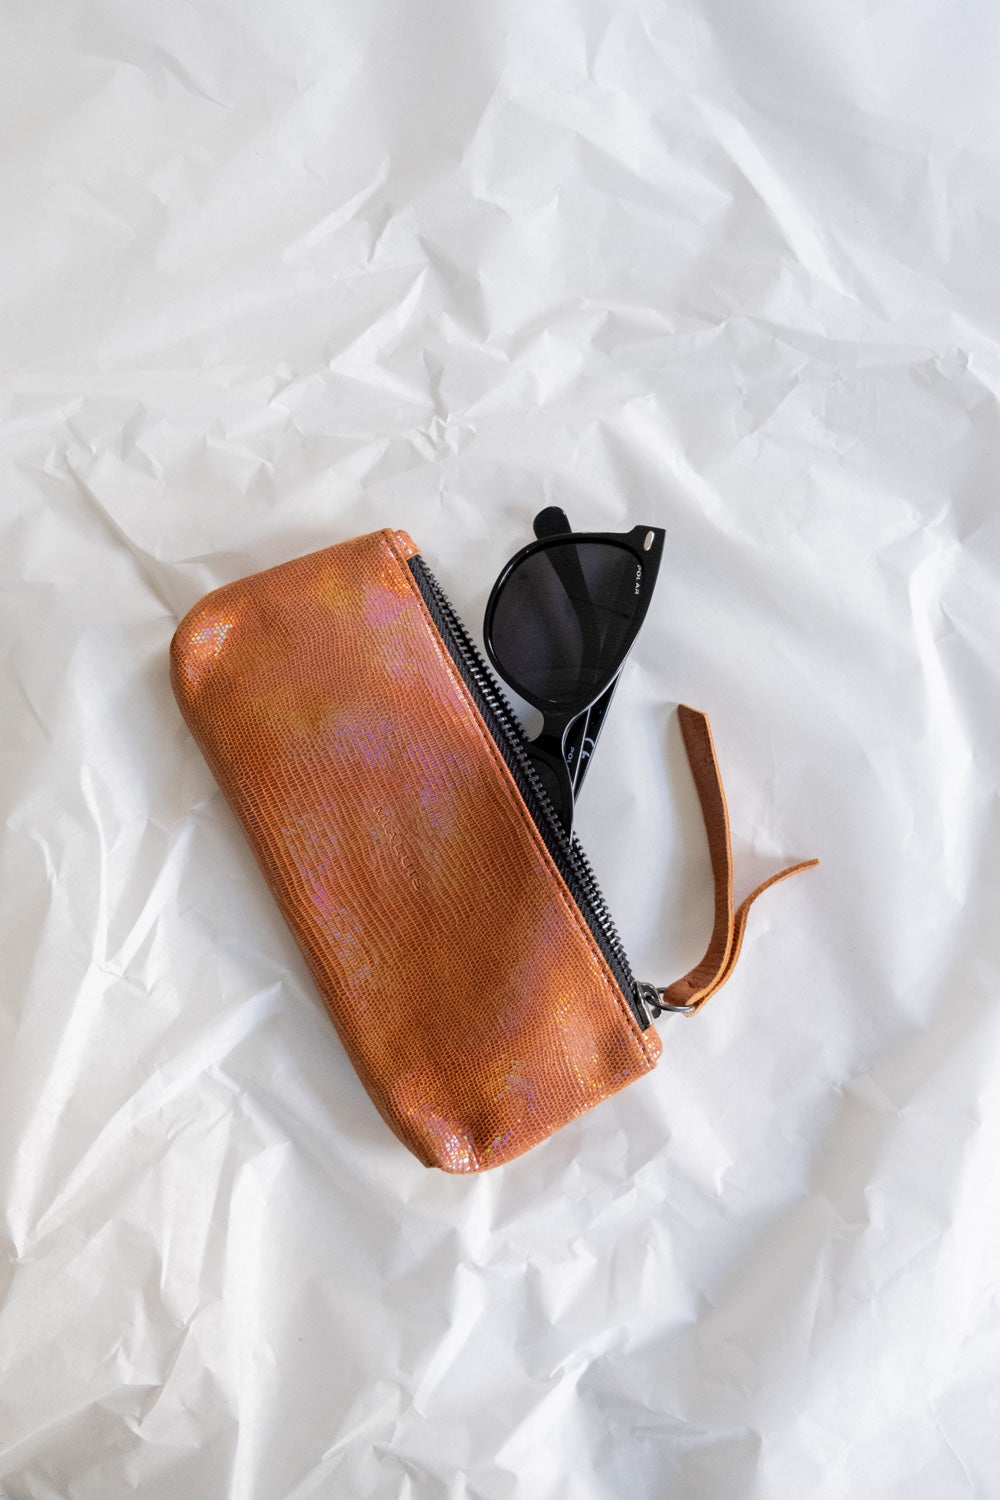 The Mialuis leather case